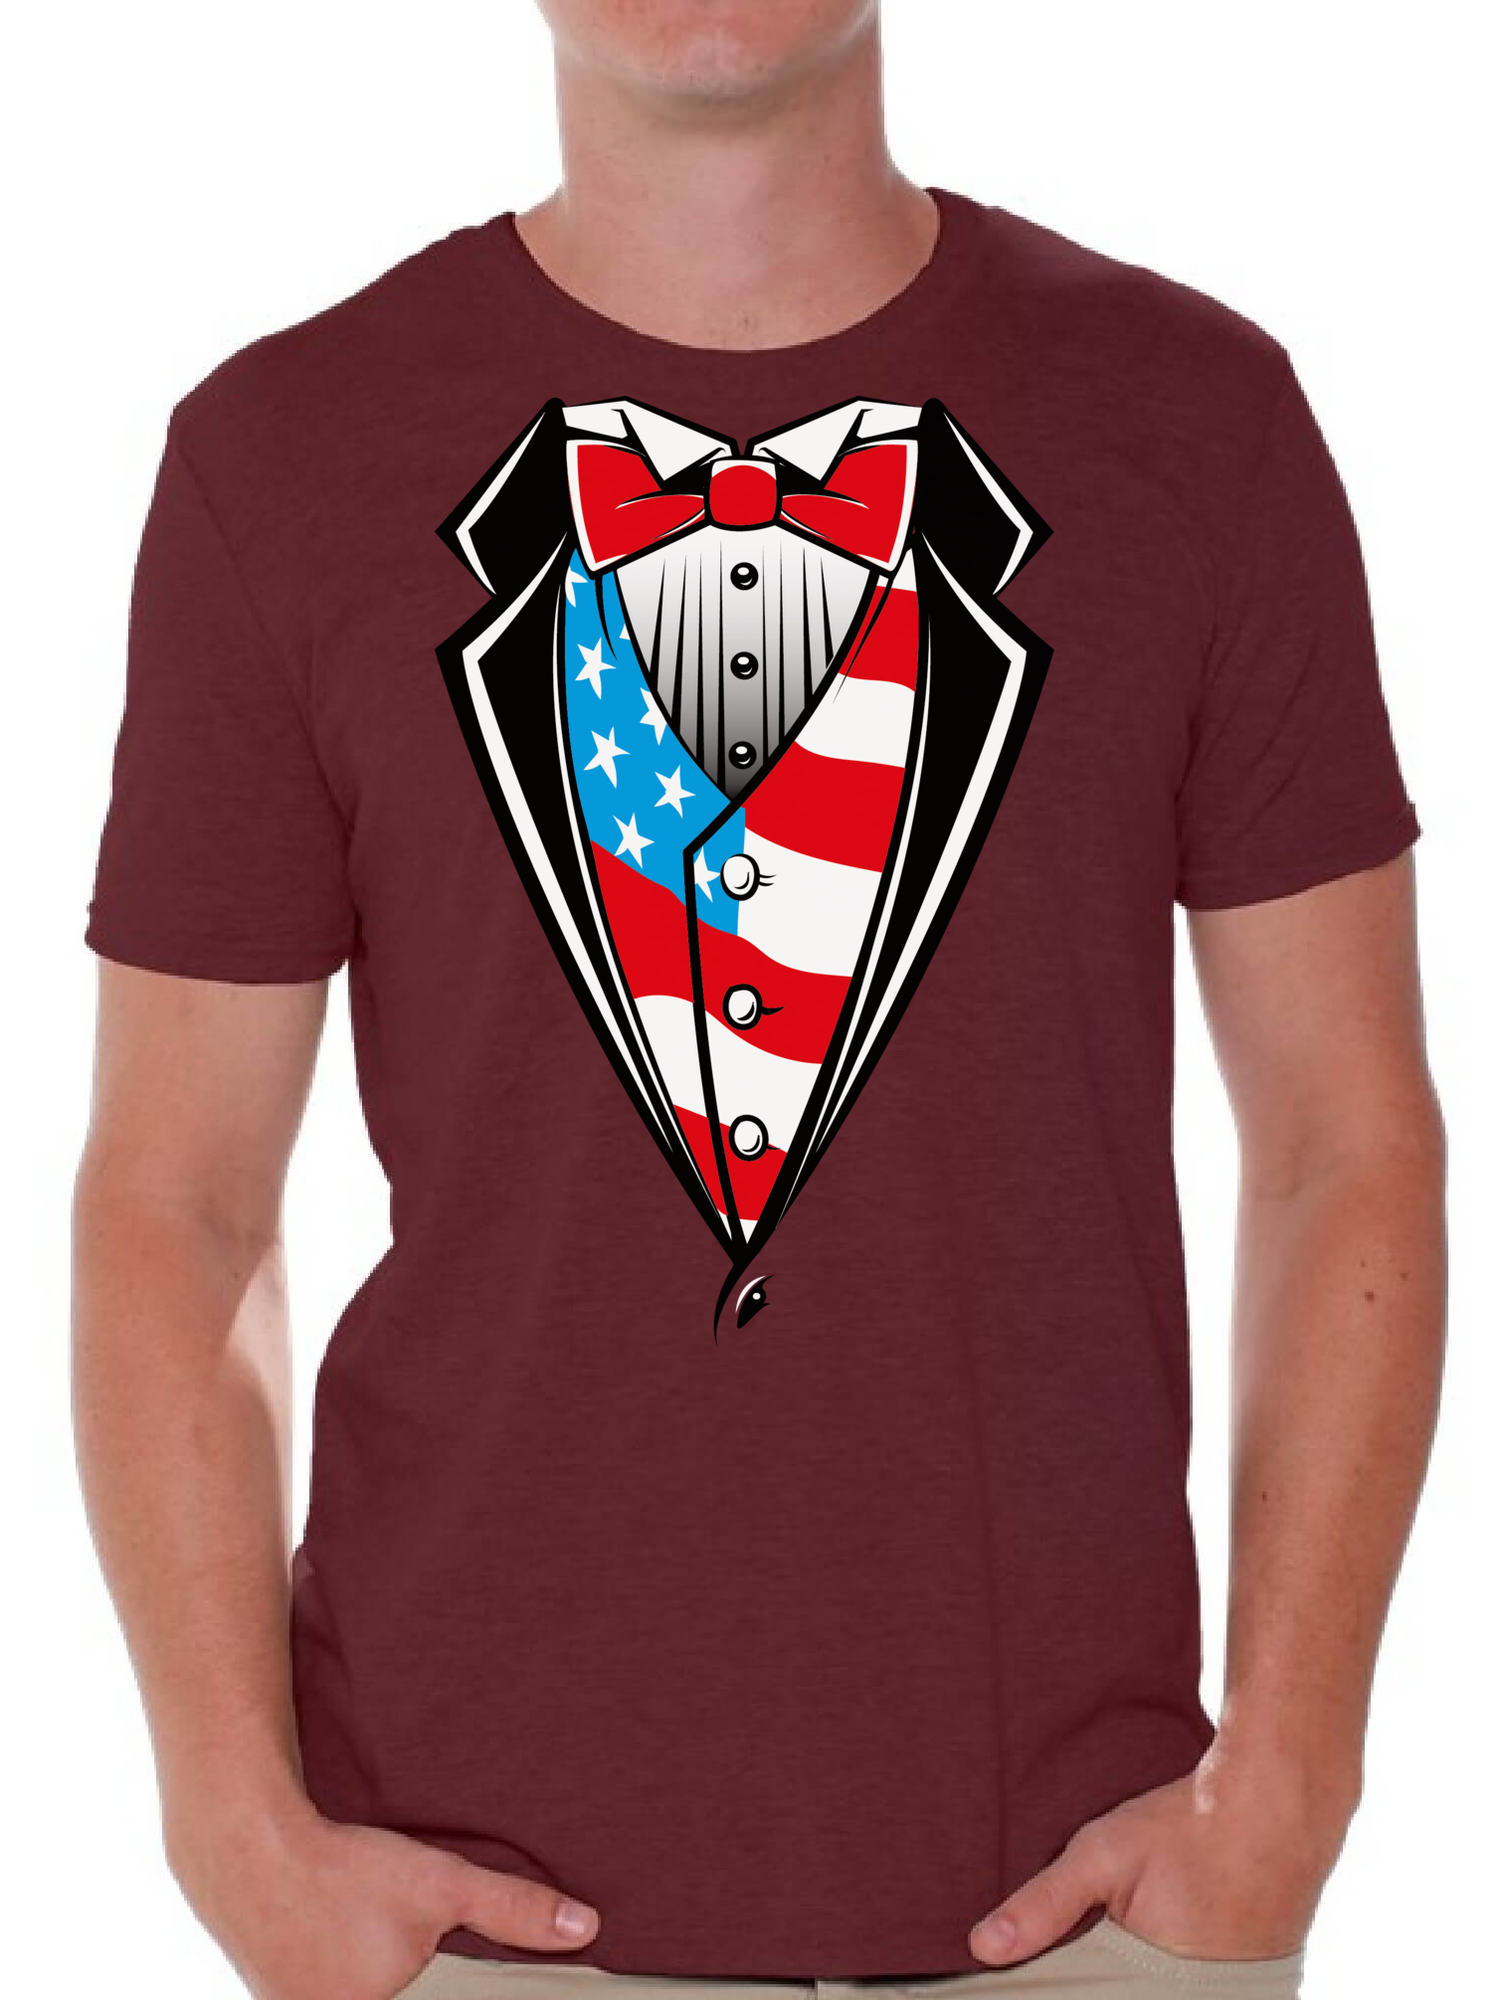 Awkward Styles Tuxedo American Flag T-shirt for Men 4th of July Shirts USA Flag Tee Shirt Tops USA Patriotic Tuxedo 4th of July Shirts for Men Independence Day Gift Fourth of July Tuxedo Shirt for Him - image 1 of 4